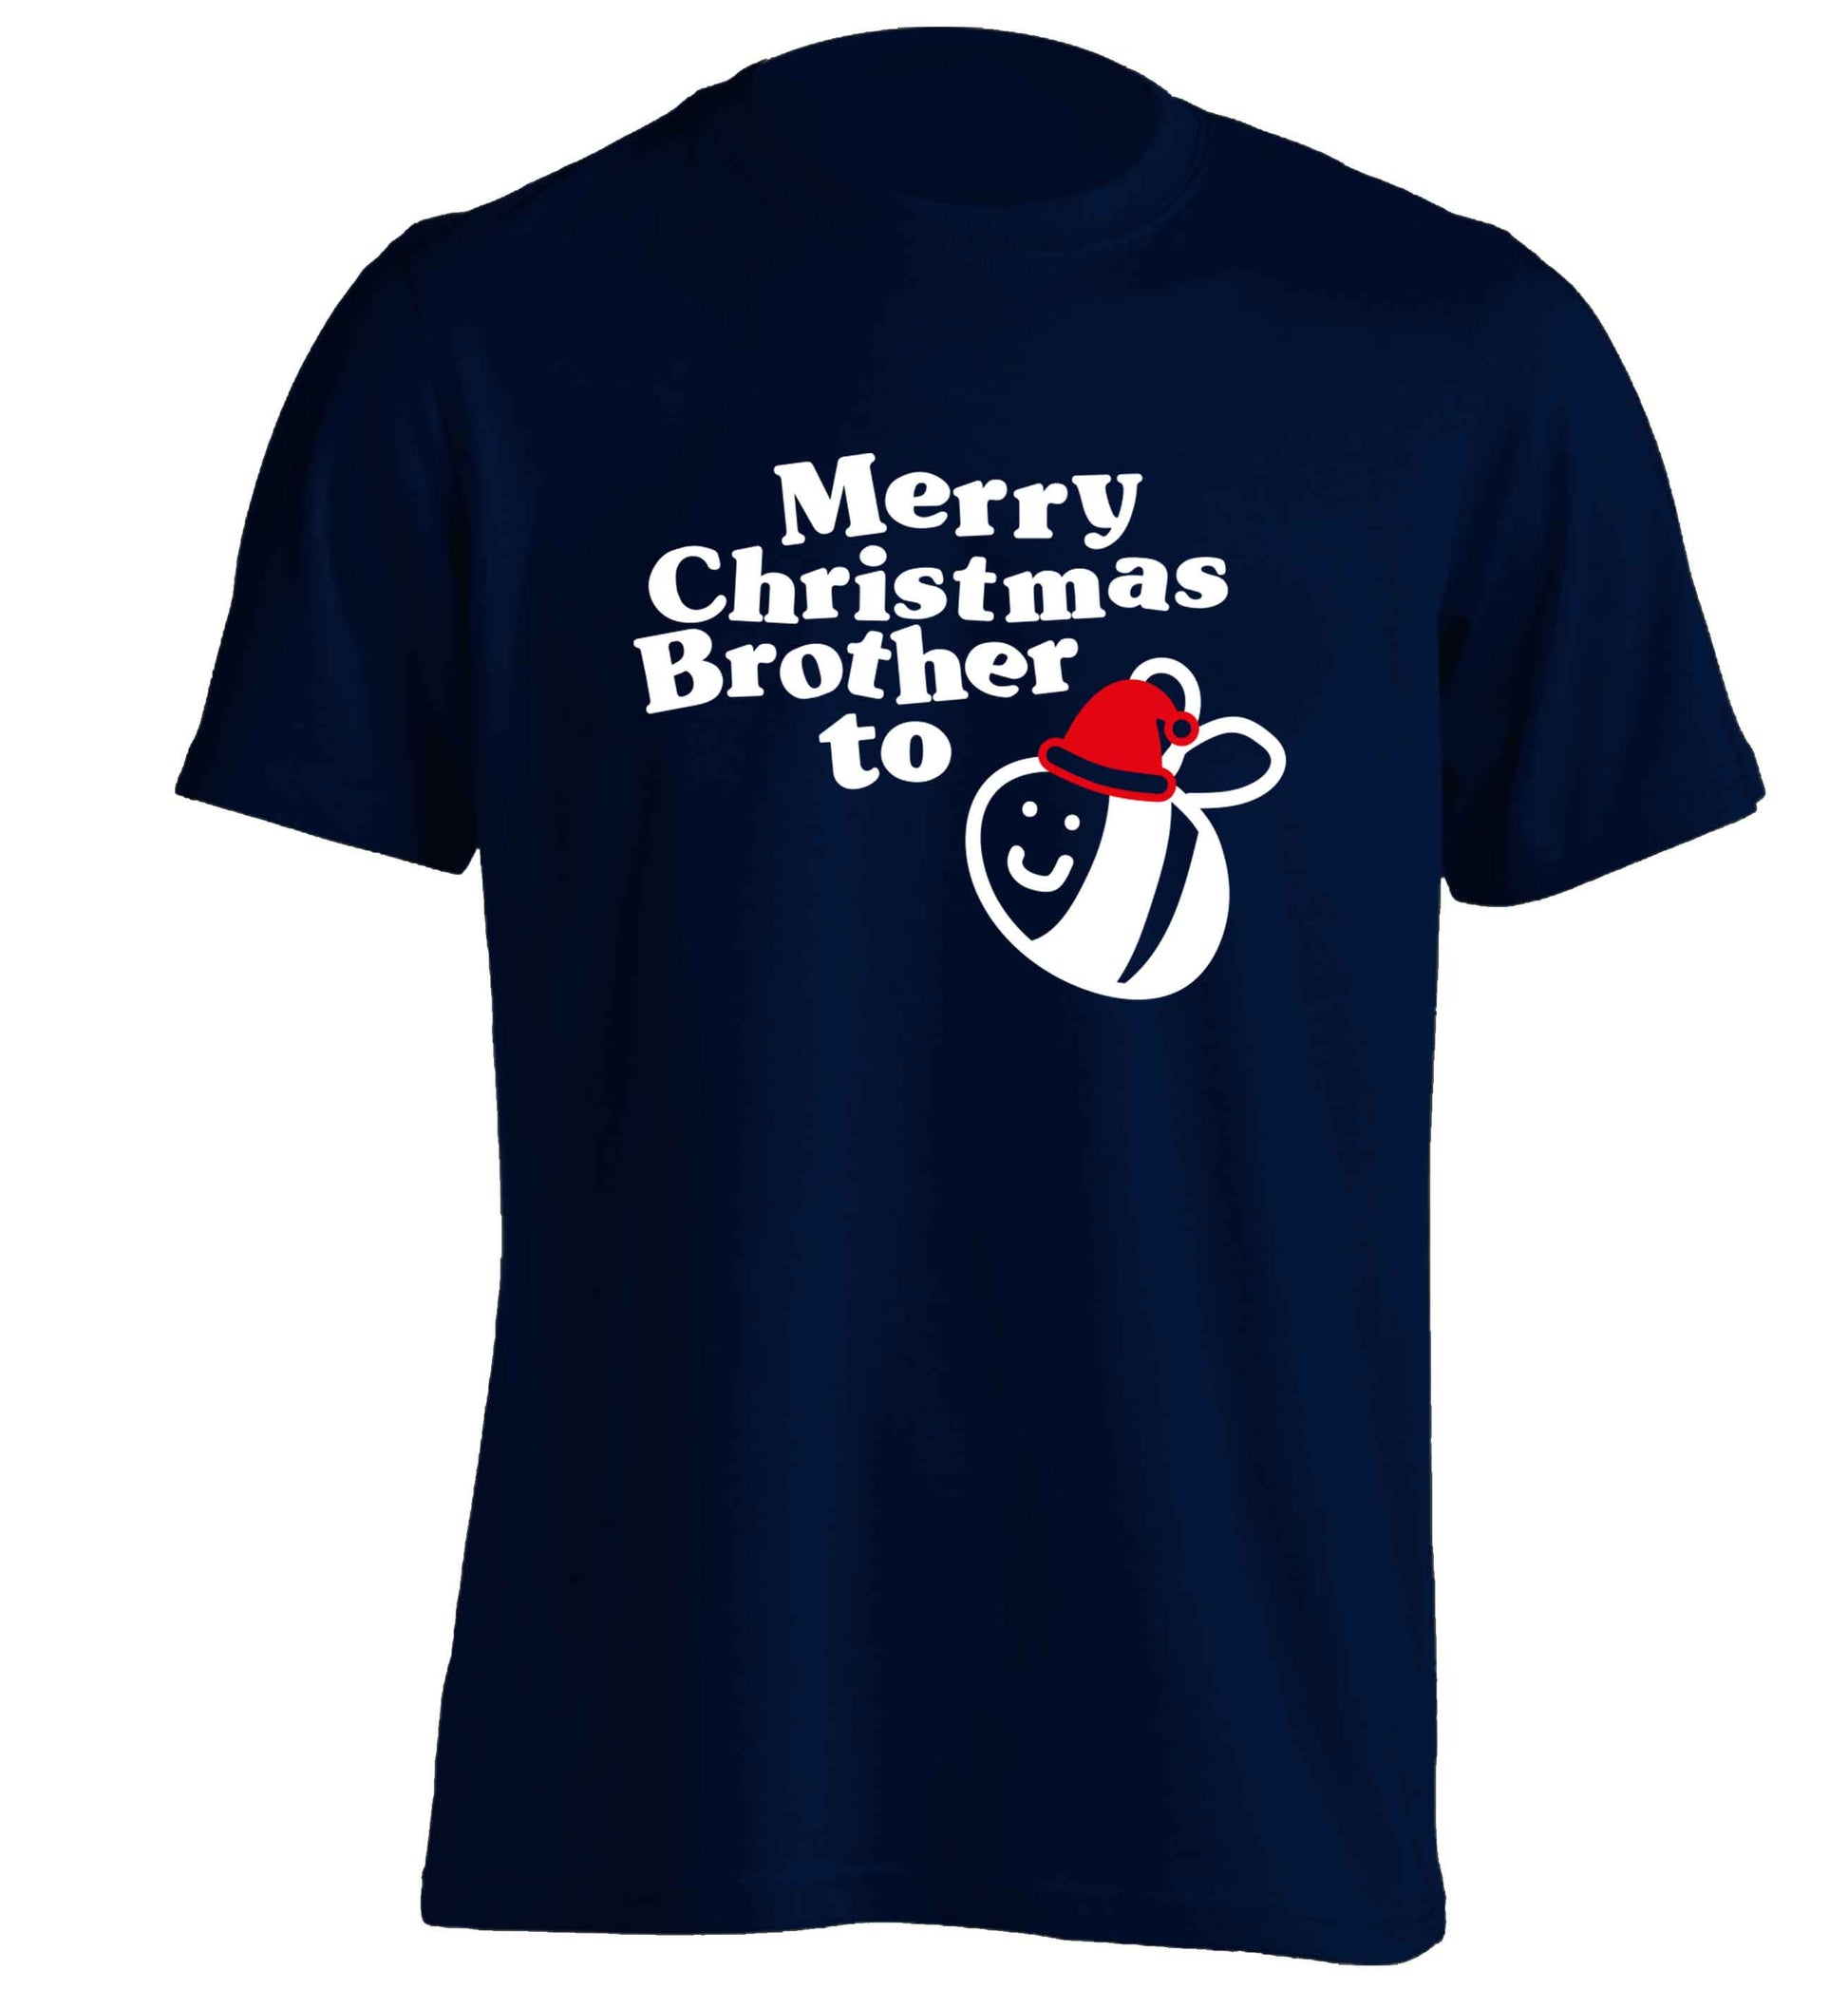 Merry Christmas brother to be adults unisex navy Tshirt 2XL